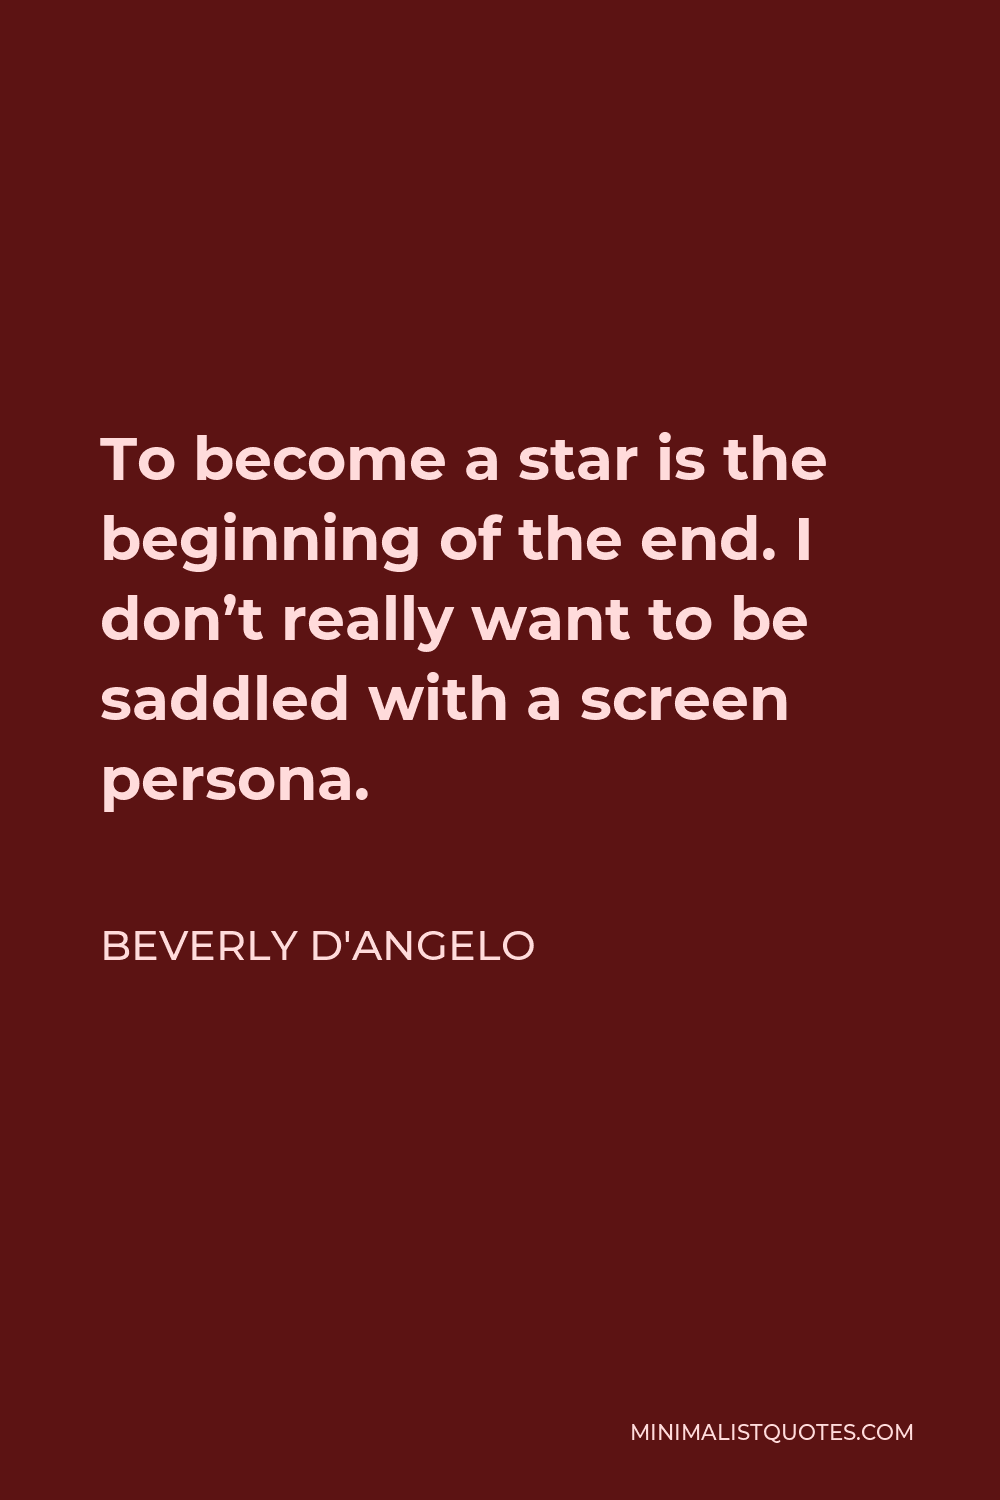 Beverly D'Angelo Quote - To become a star is the beginning of the end. I don’t really want to be saddled with a screen persona.